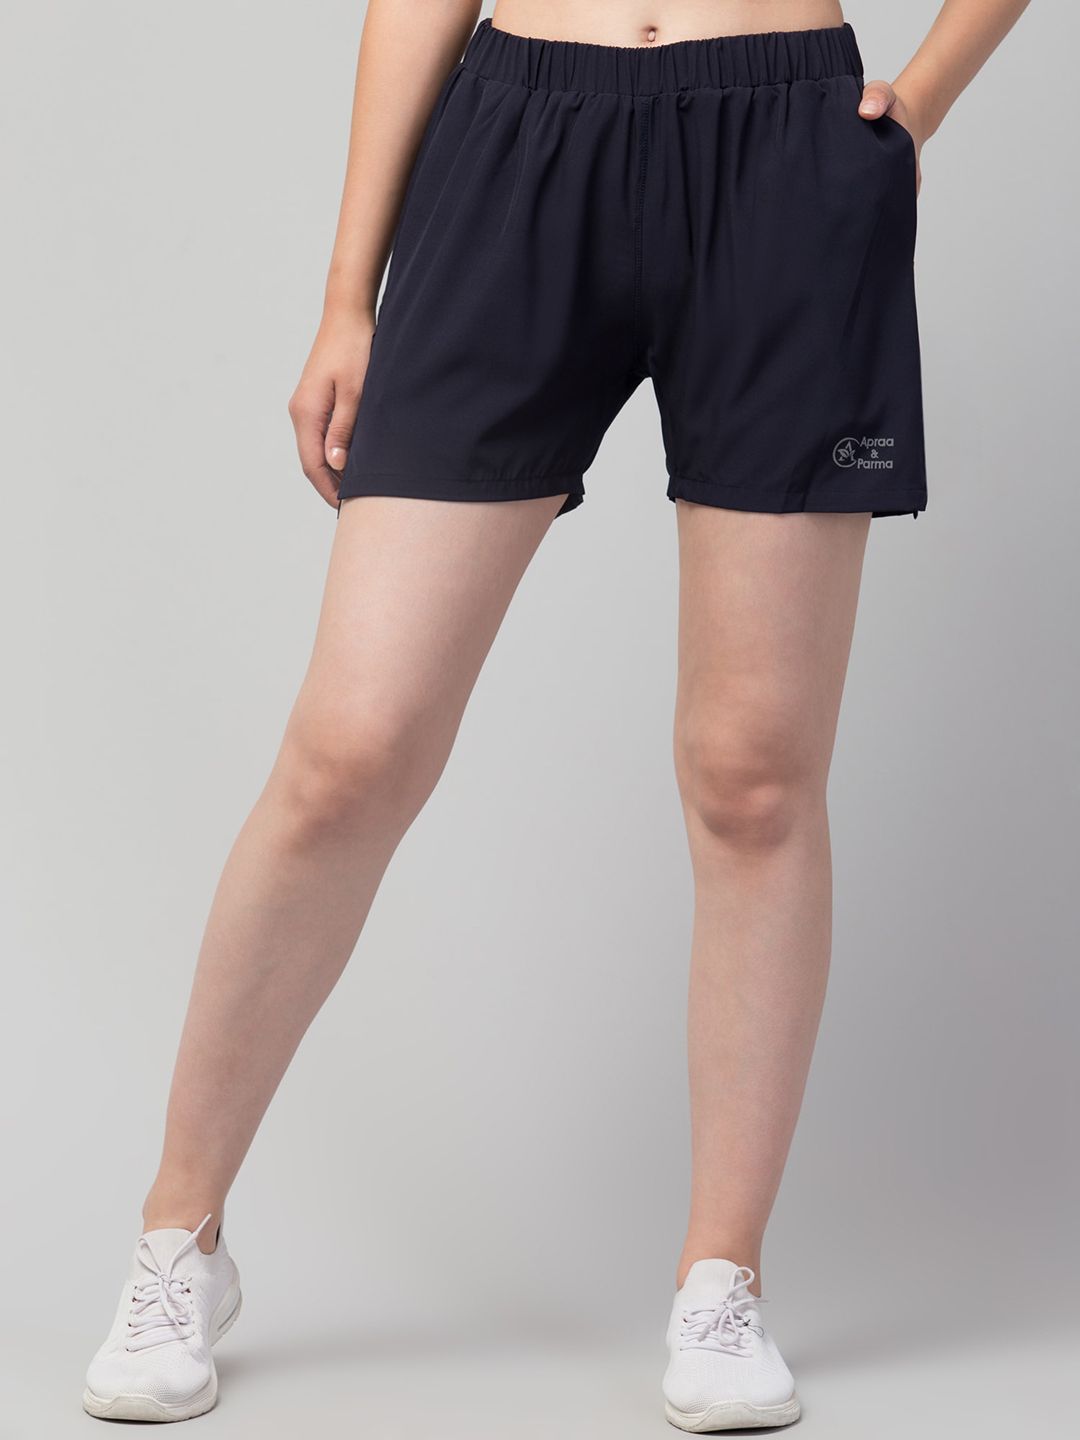 Apraa & Parma Womene-Dry Technology Sports Shorts Price in India